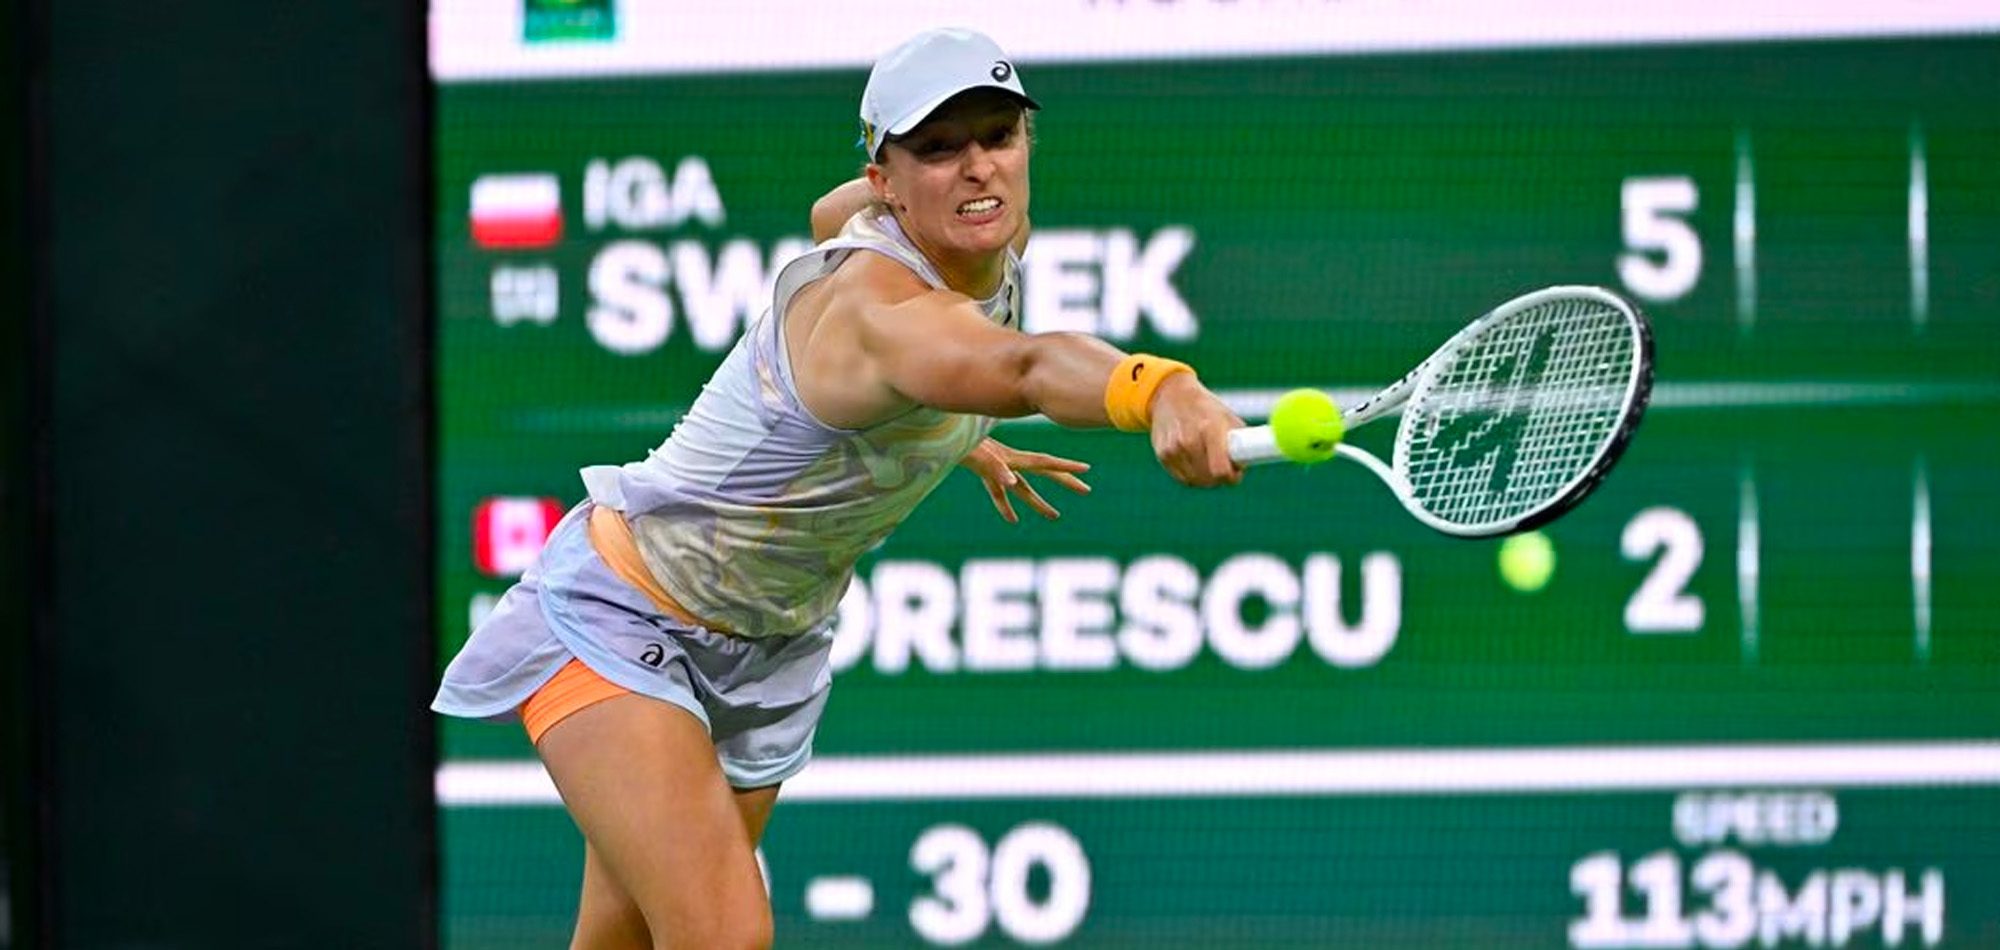 Swiatek quiets the chaos to advance at Indian Wells